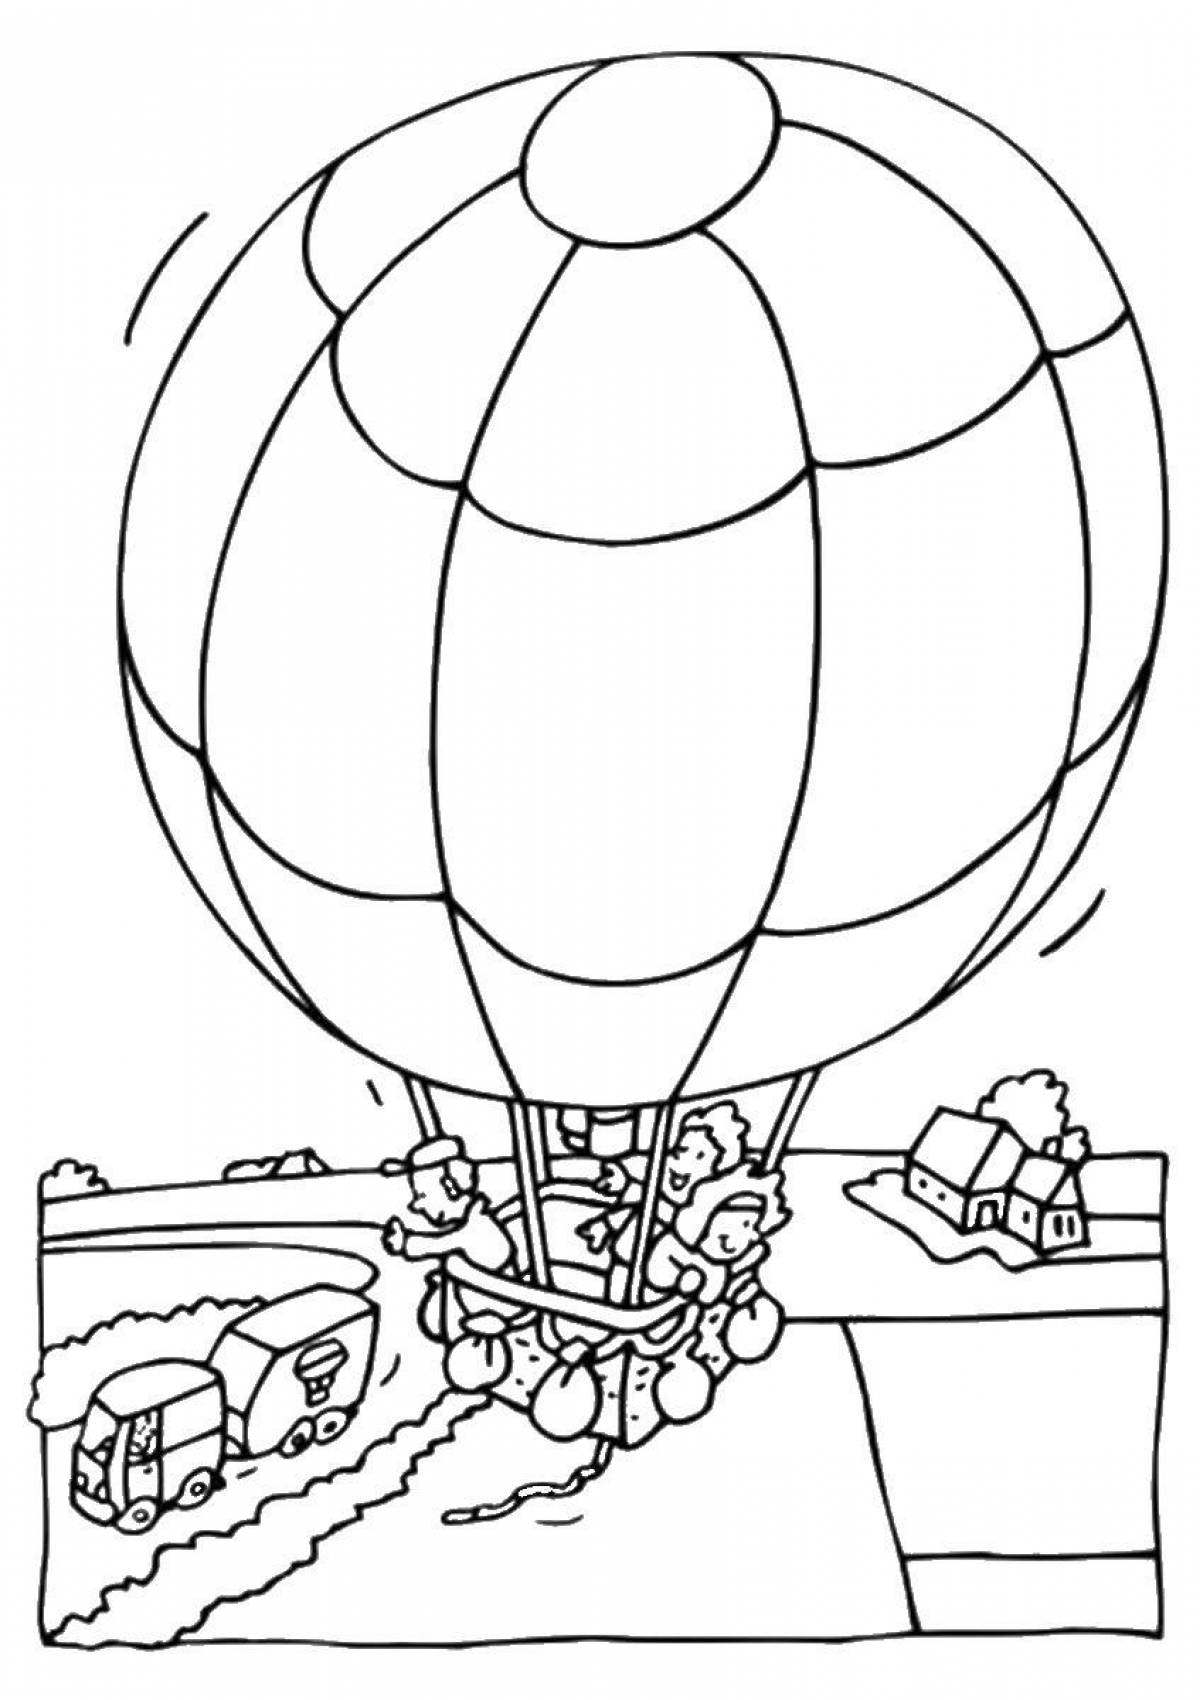 Glitter ball coloring page